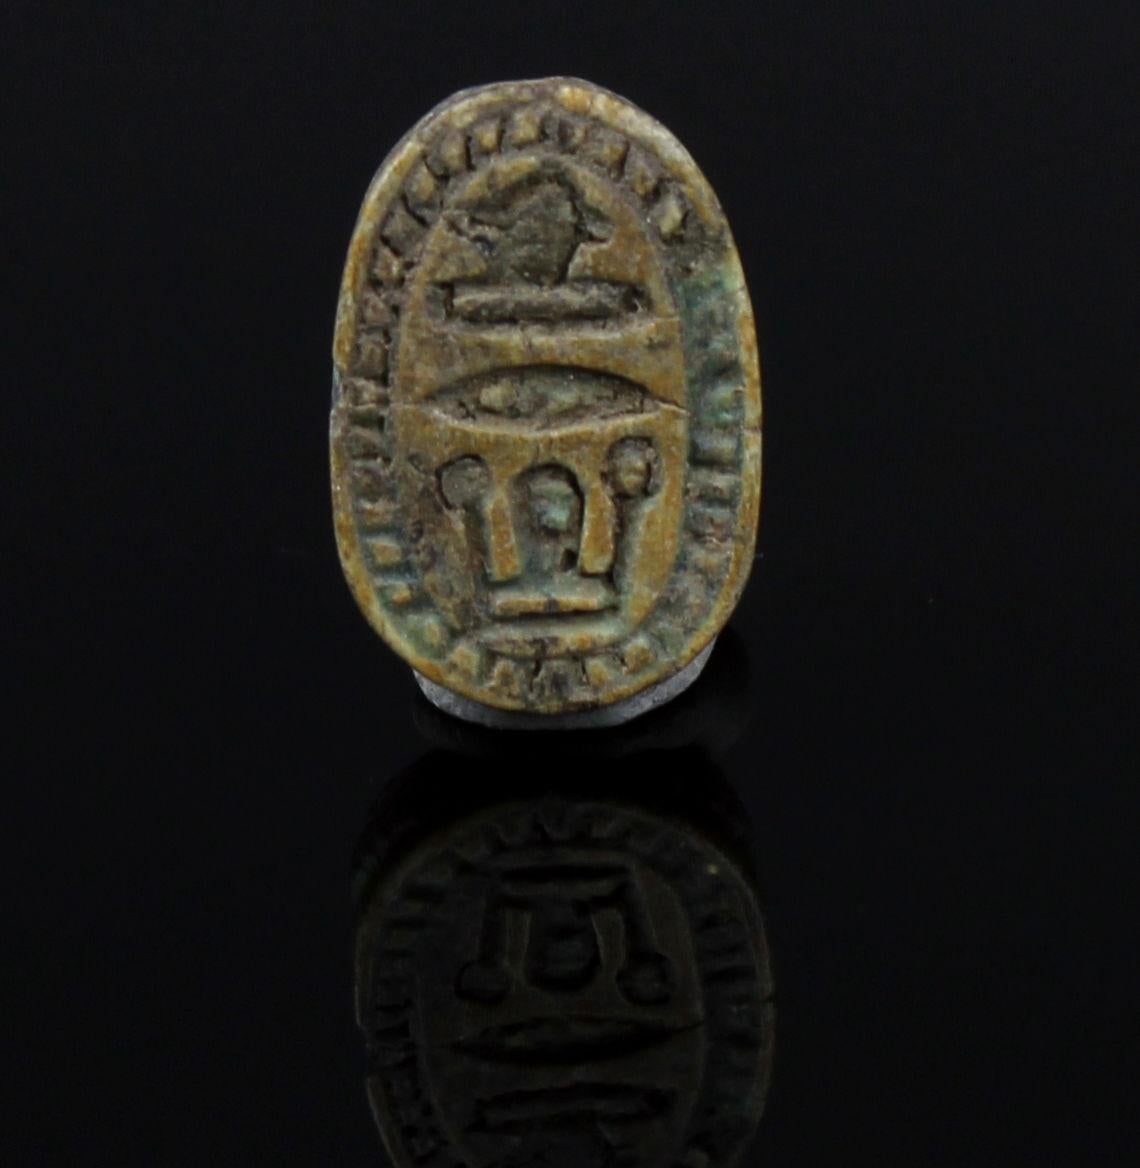 ITEM: Scarab
MATERIAL: Glazed steatite
CULTURE: Egyptian
PERIOD: Second Intermediate Period, 1700 – 1550 B.C
DIMENSIONS: 14 mm x 8 mm
CONDITION: Good condition
PROVENANCE: Ex American egyptologist collection, active in the early part of the 20th